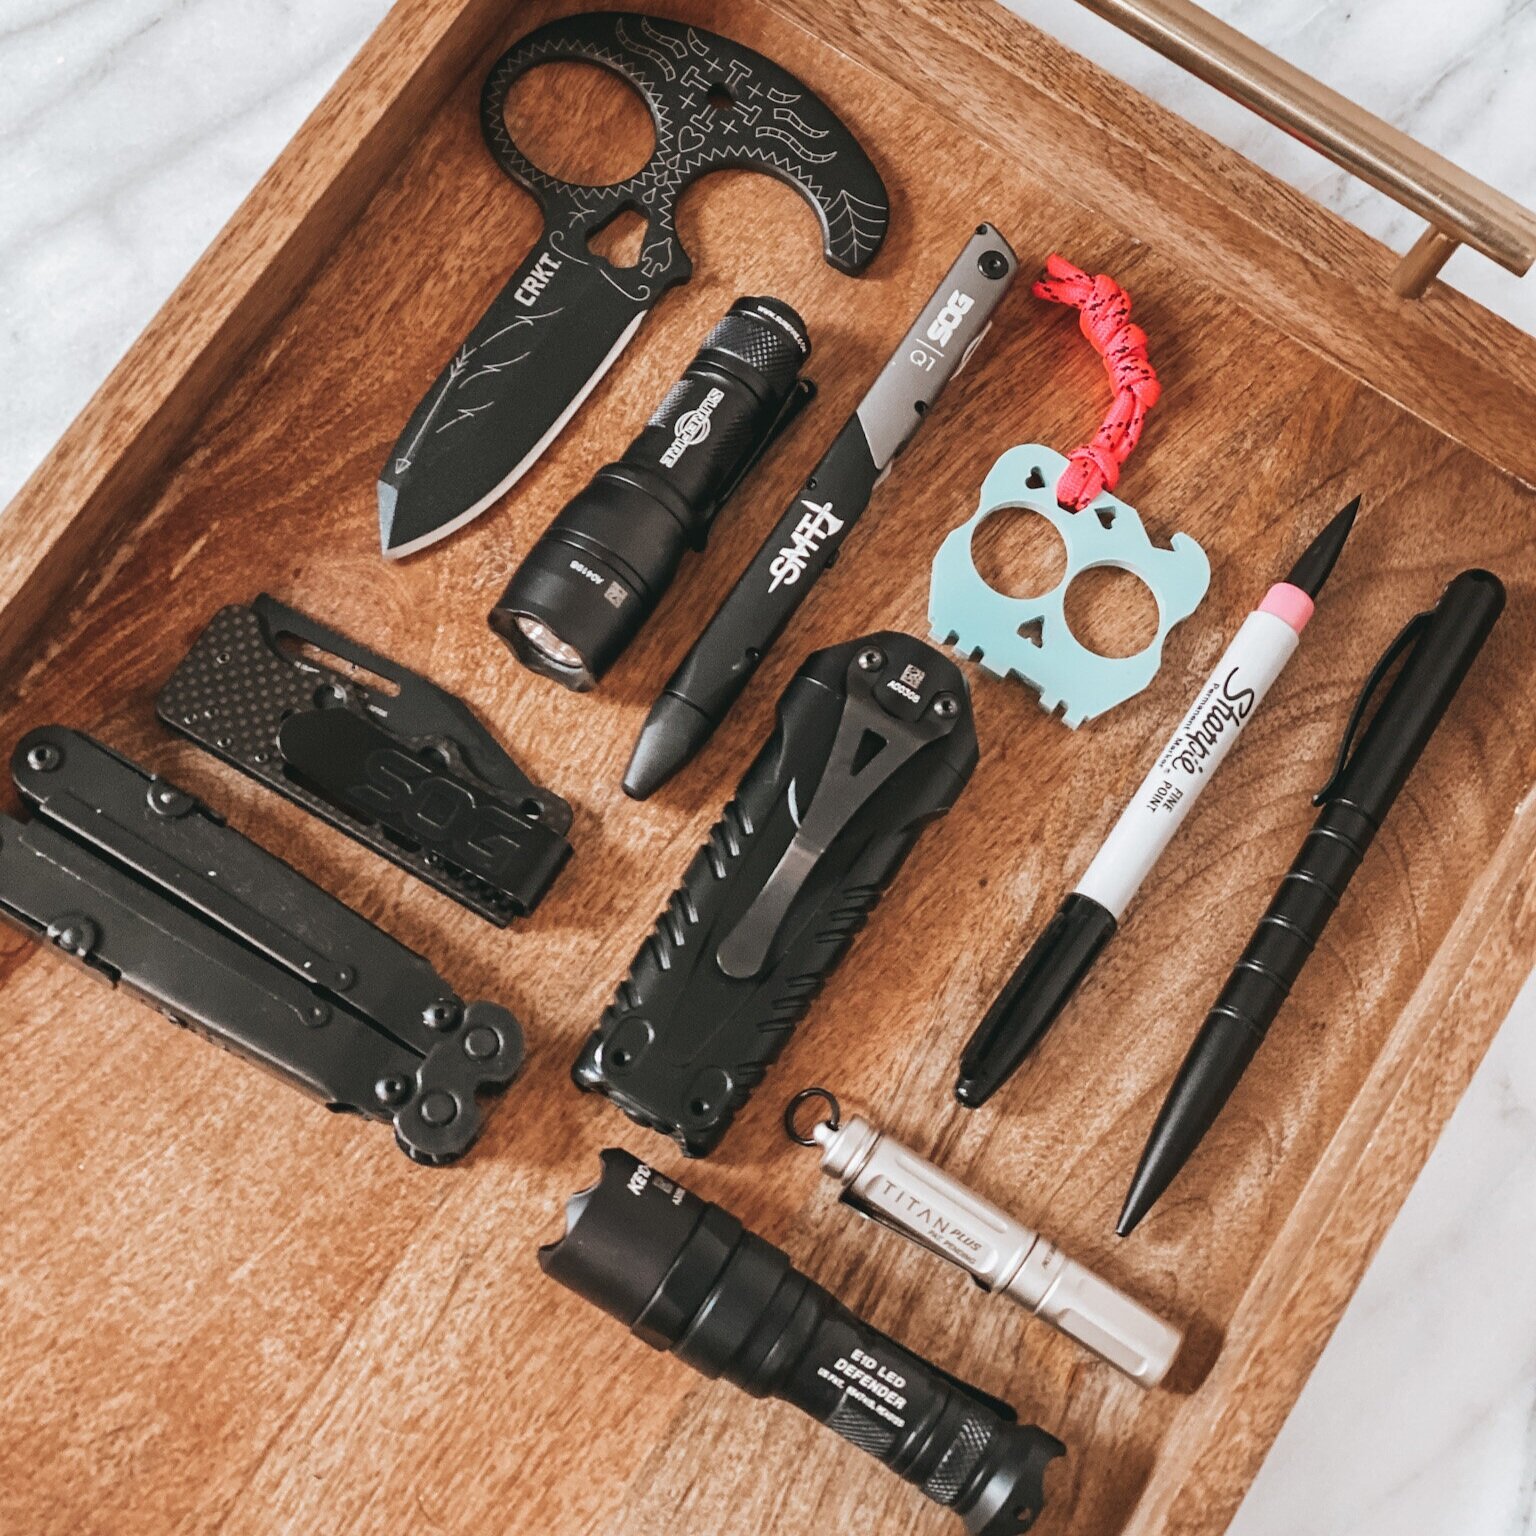 The Best EDC Gear: Everyday Carry Tools for 2023